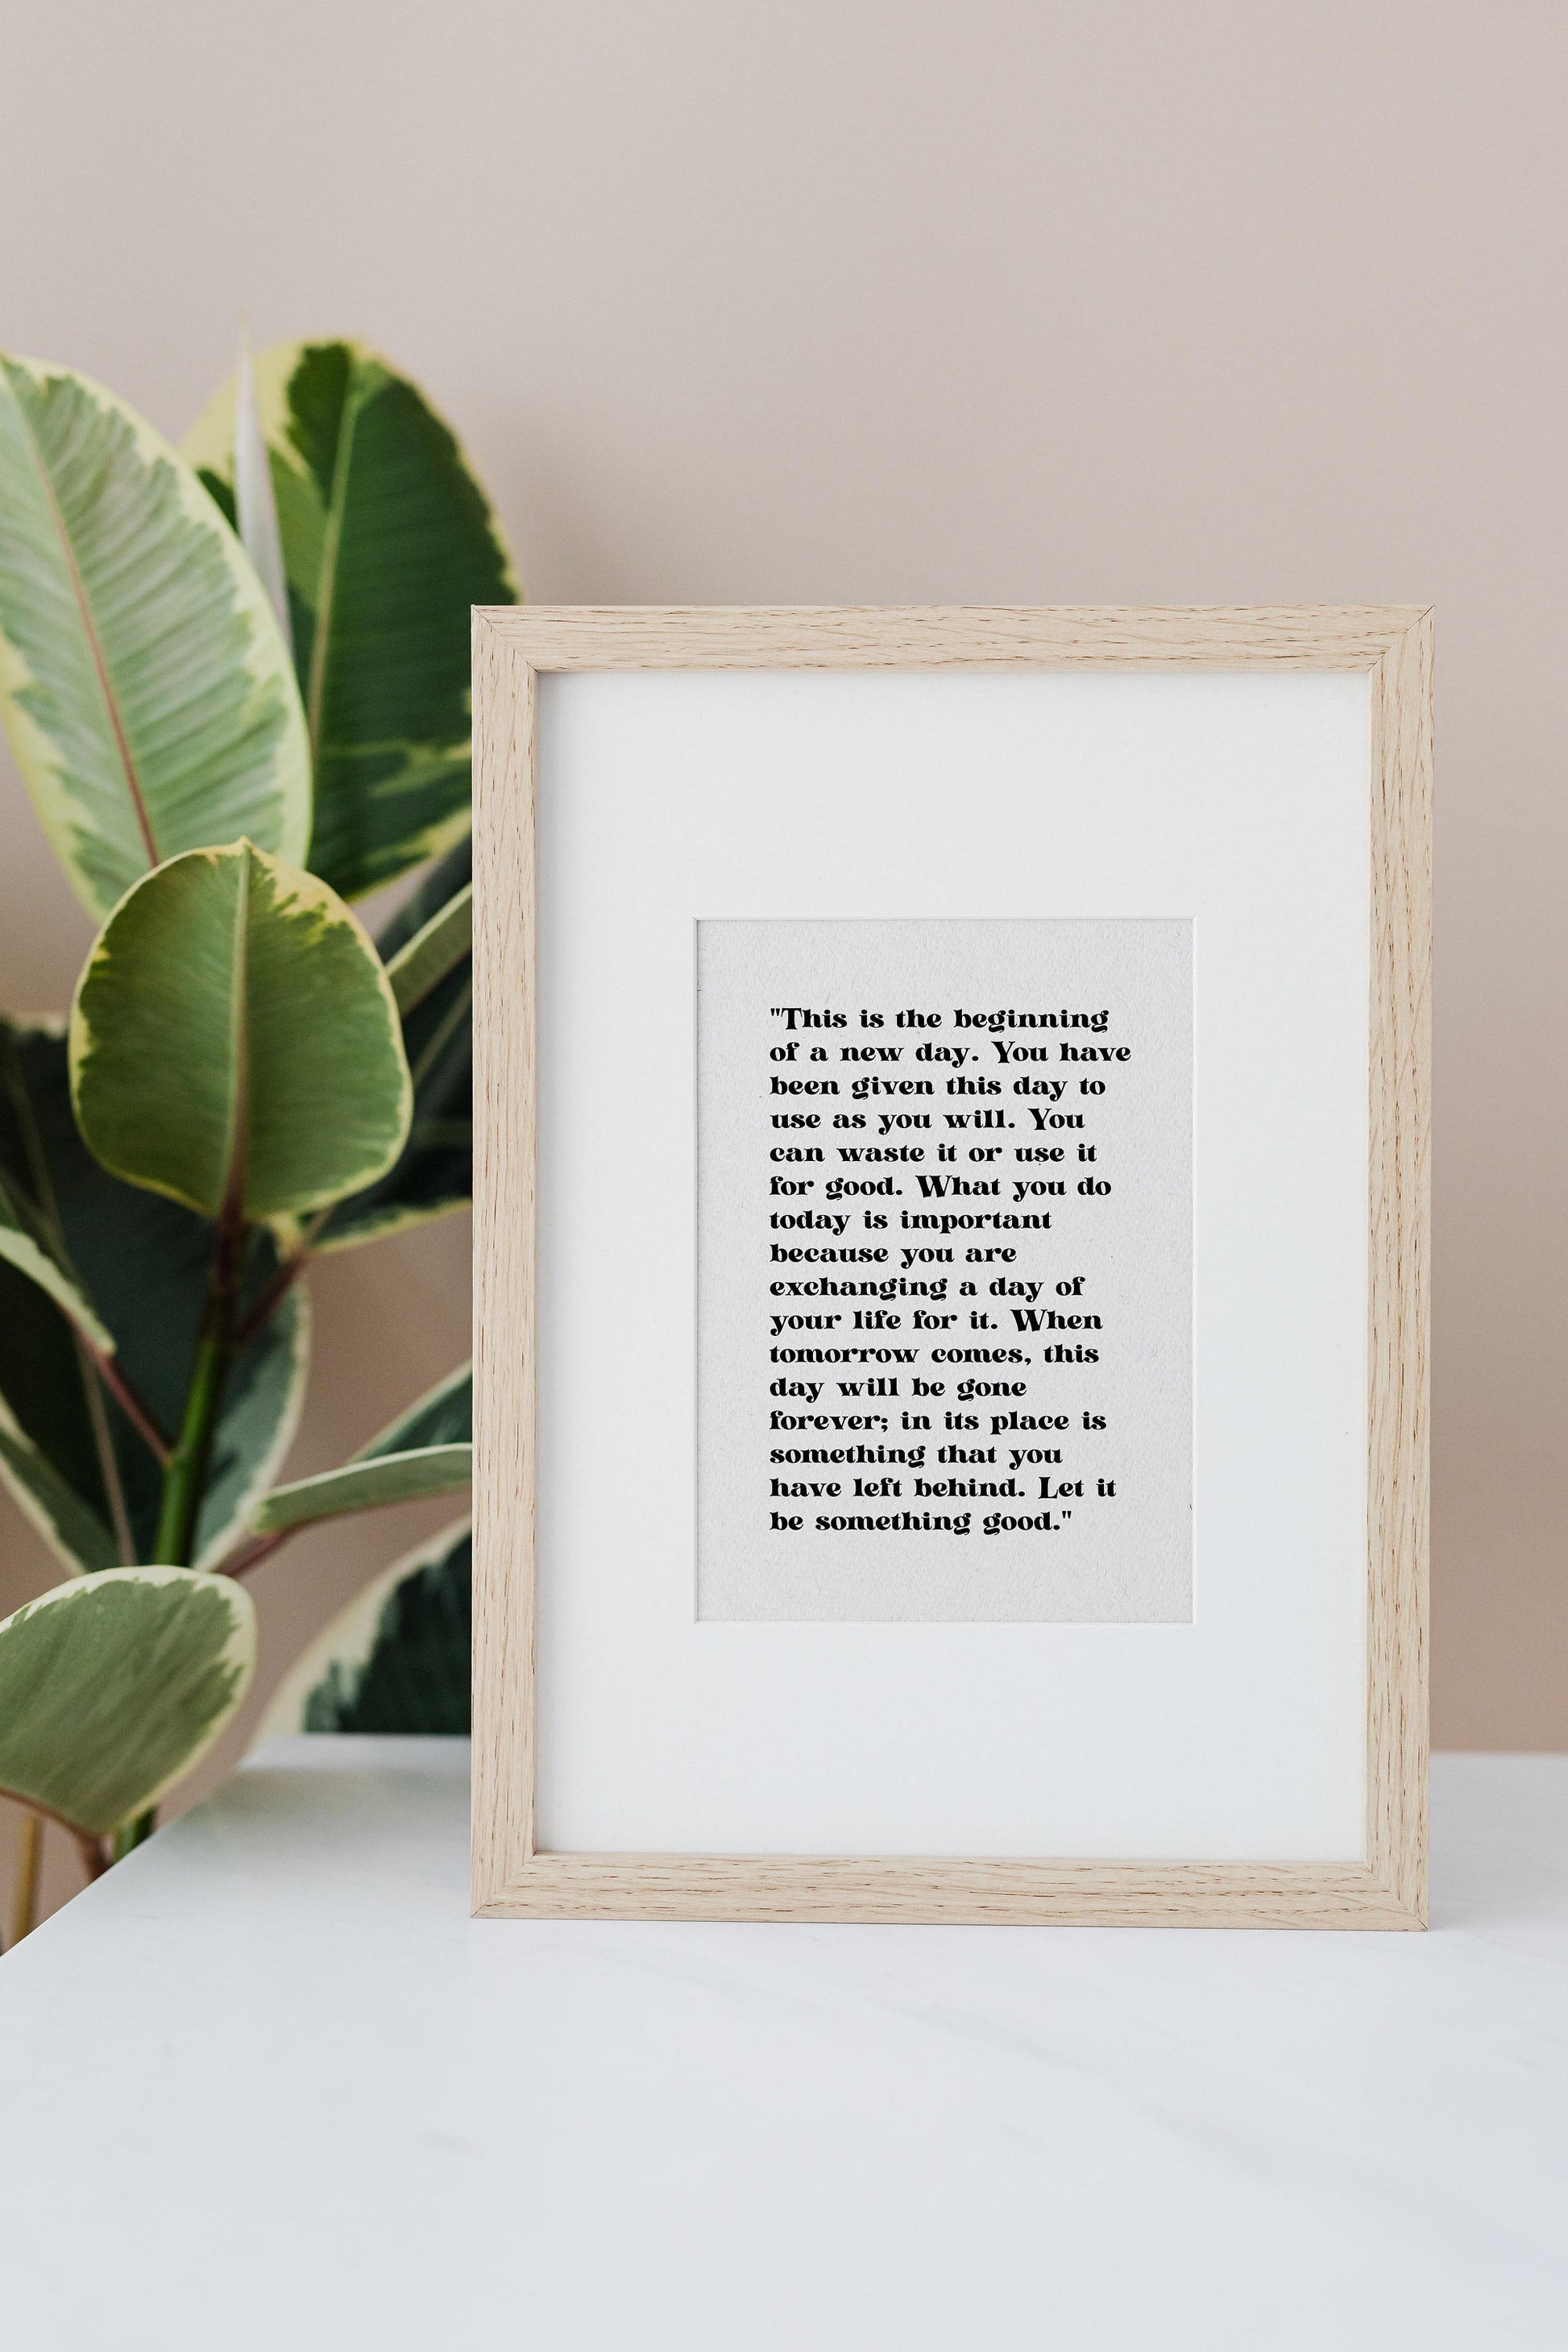 This is the beginning of a new day Book Quote Prints, Framed, Inspirational Wall Decor, quote wall art